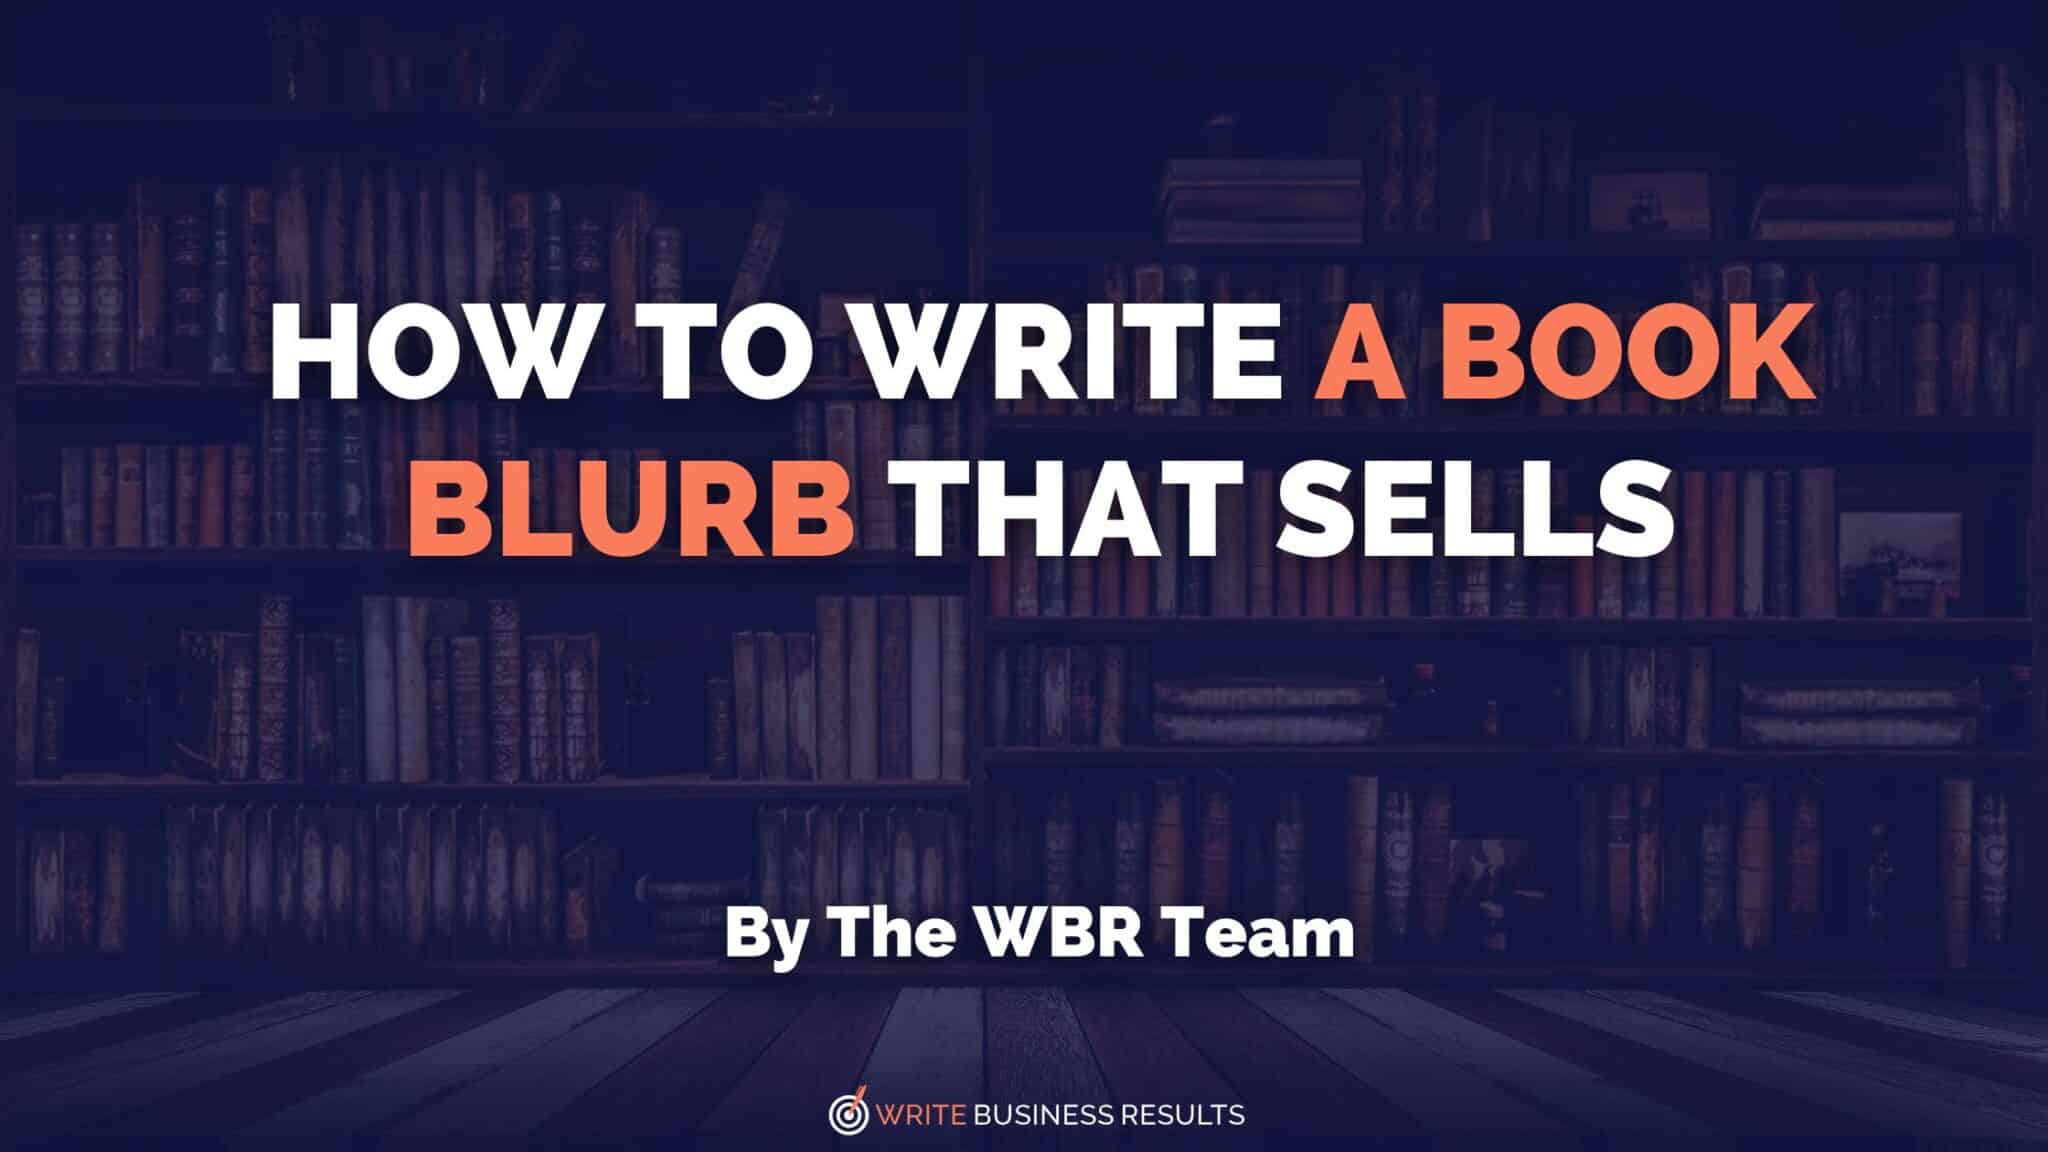 How To Write A Book Blurb That Sells